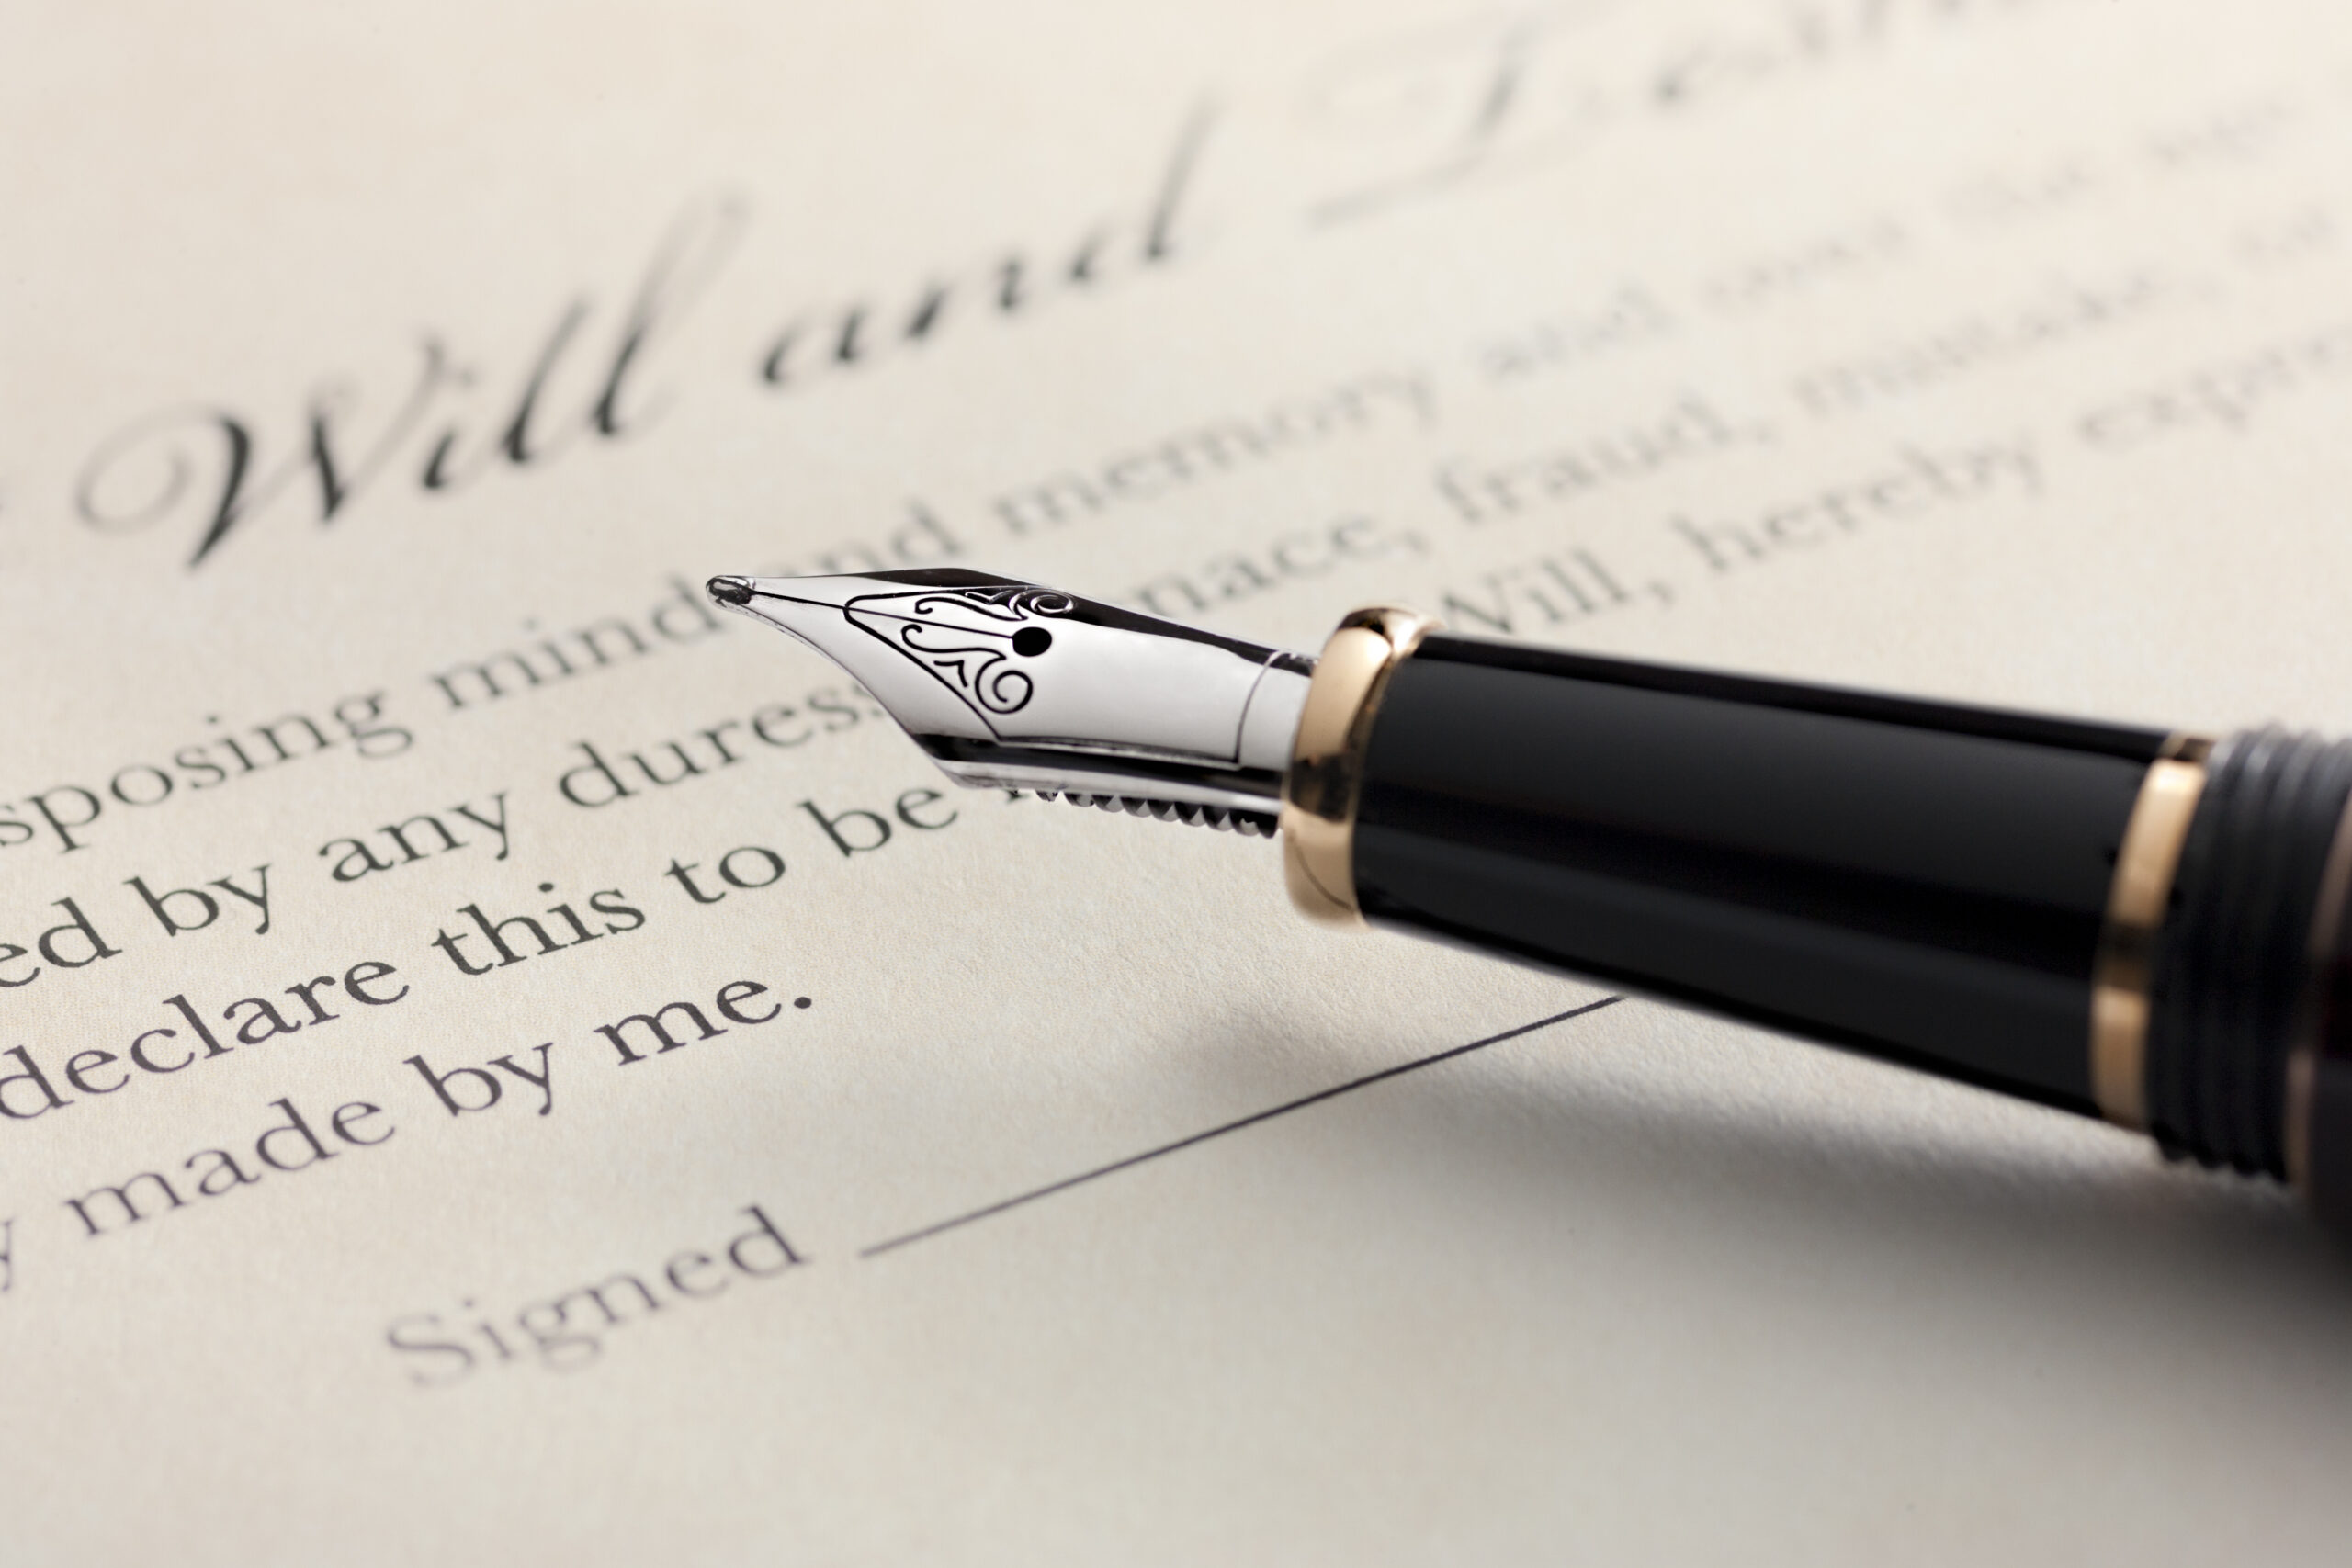 Fountain pen signing a will